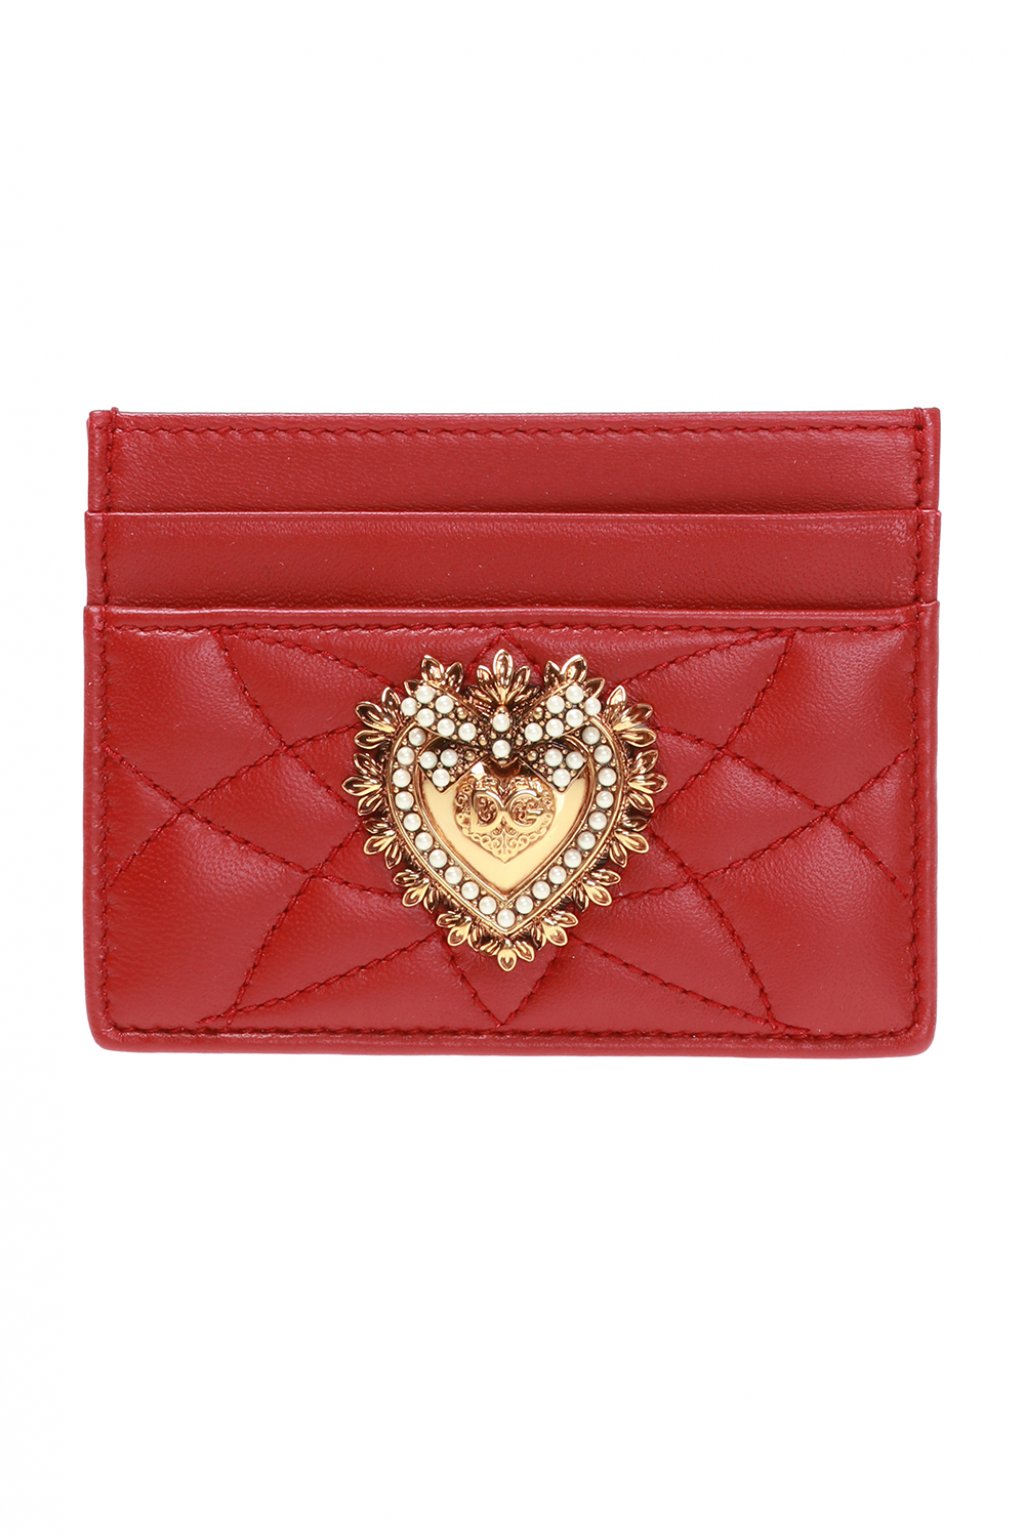 dolce Thank & Gabbana ‘Devotion’ quilted card case